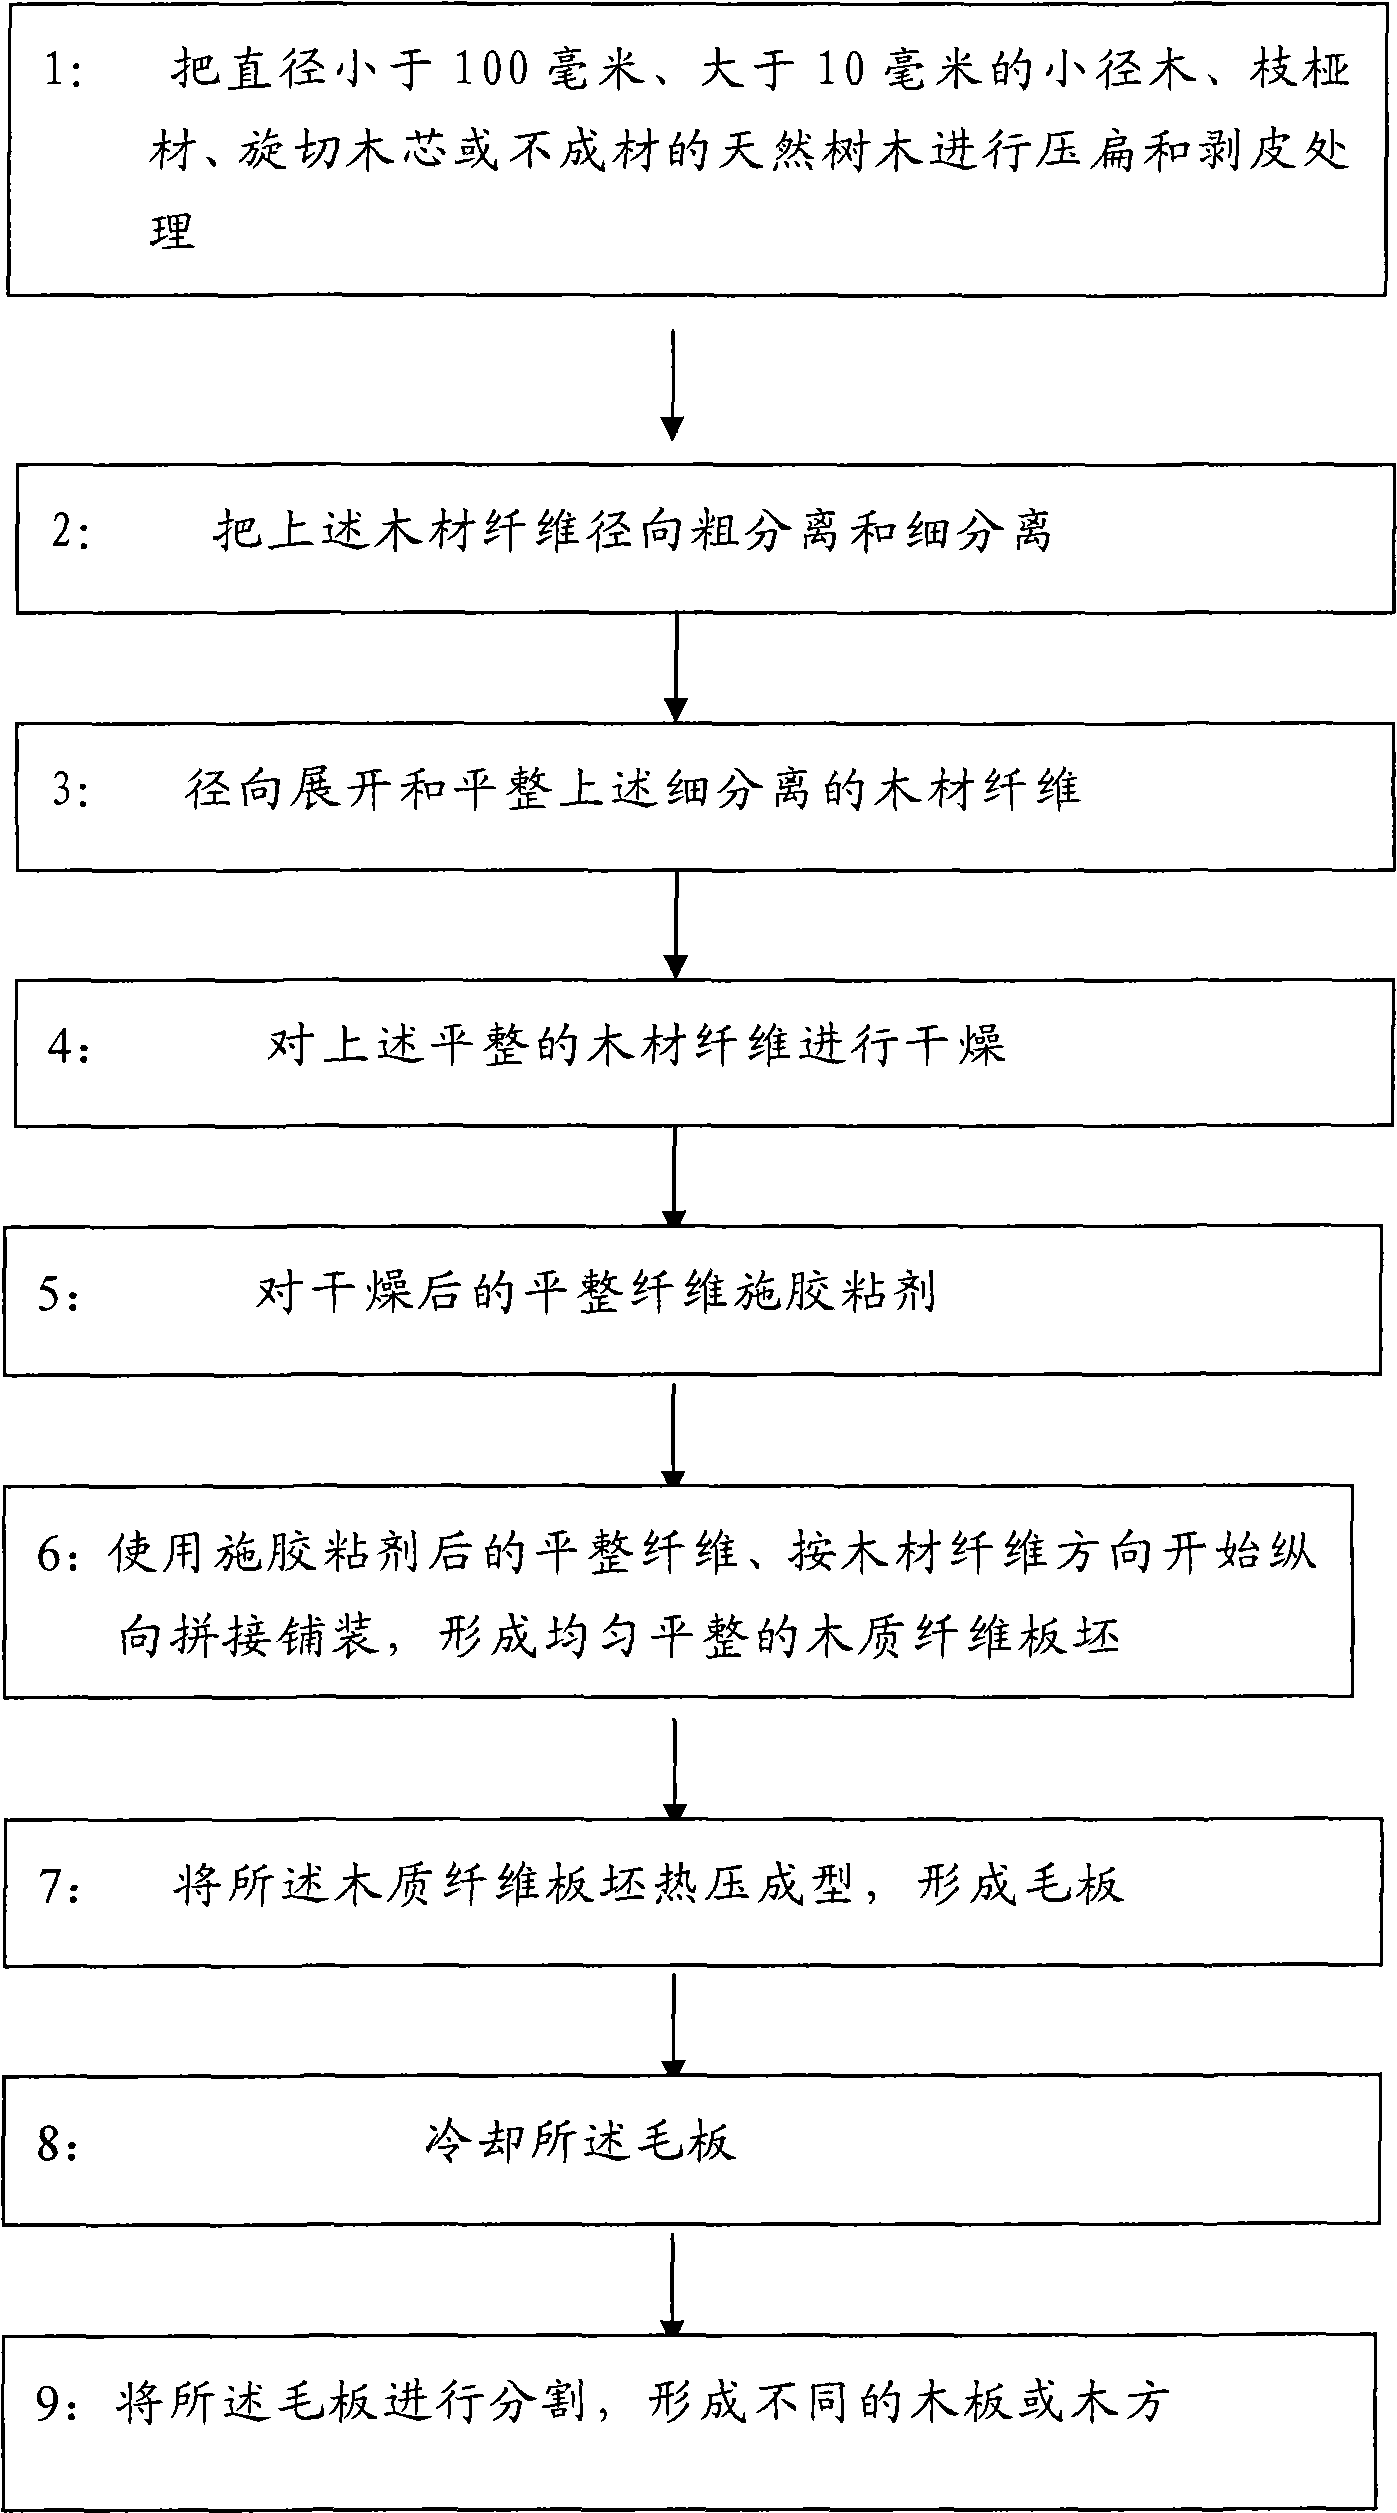 Preparation method for producing wood board or flitch beam